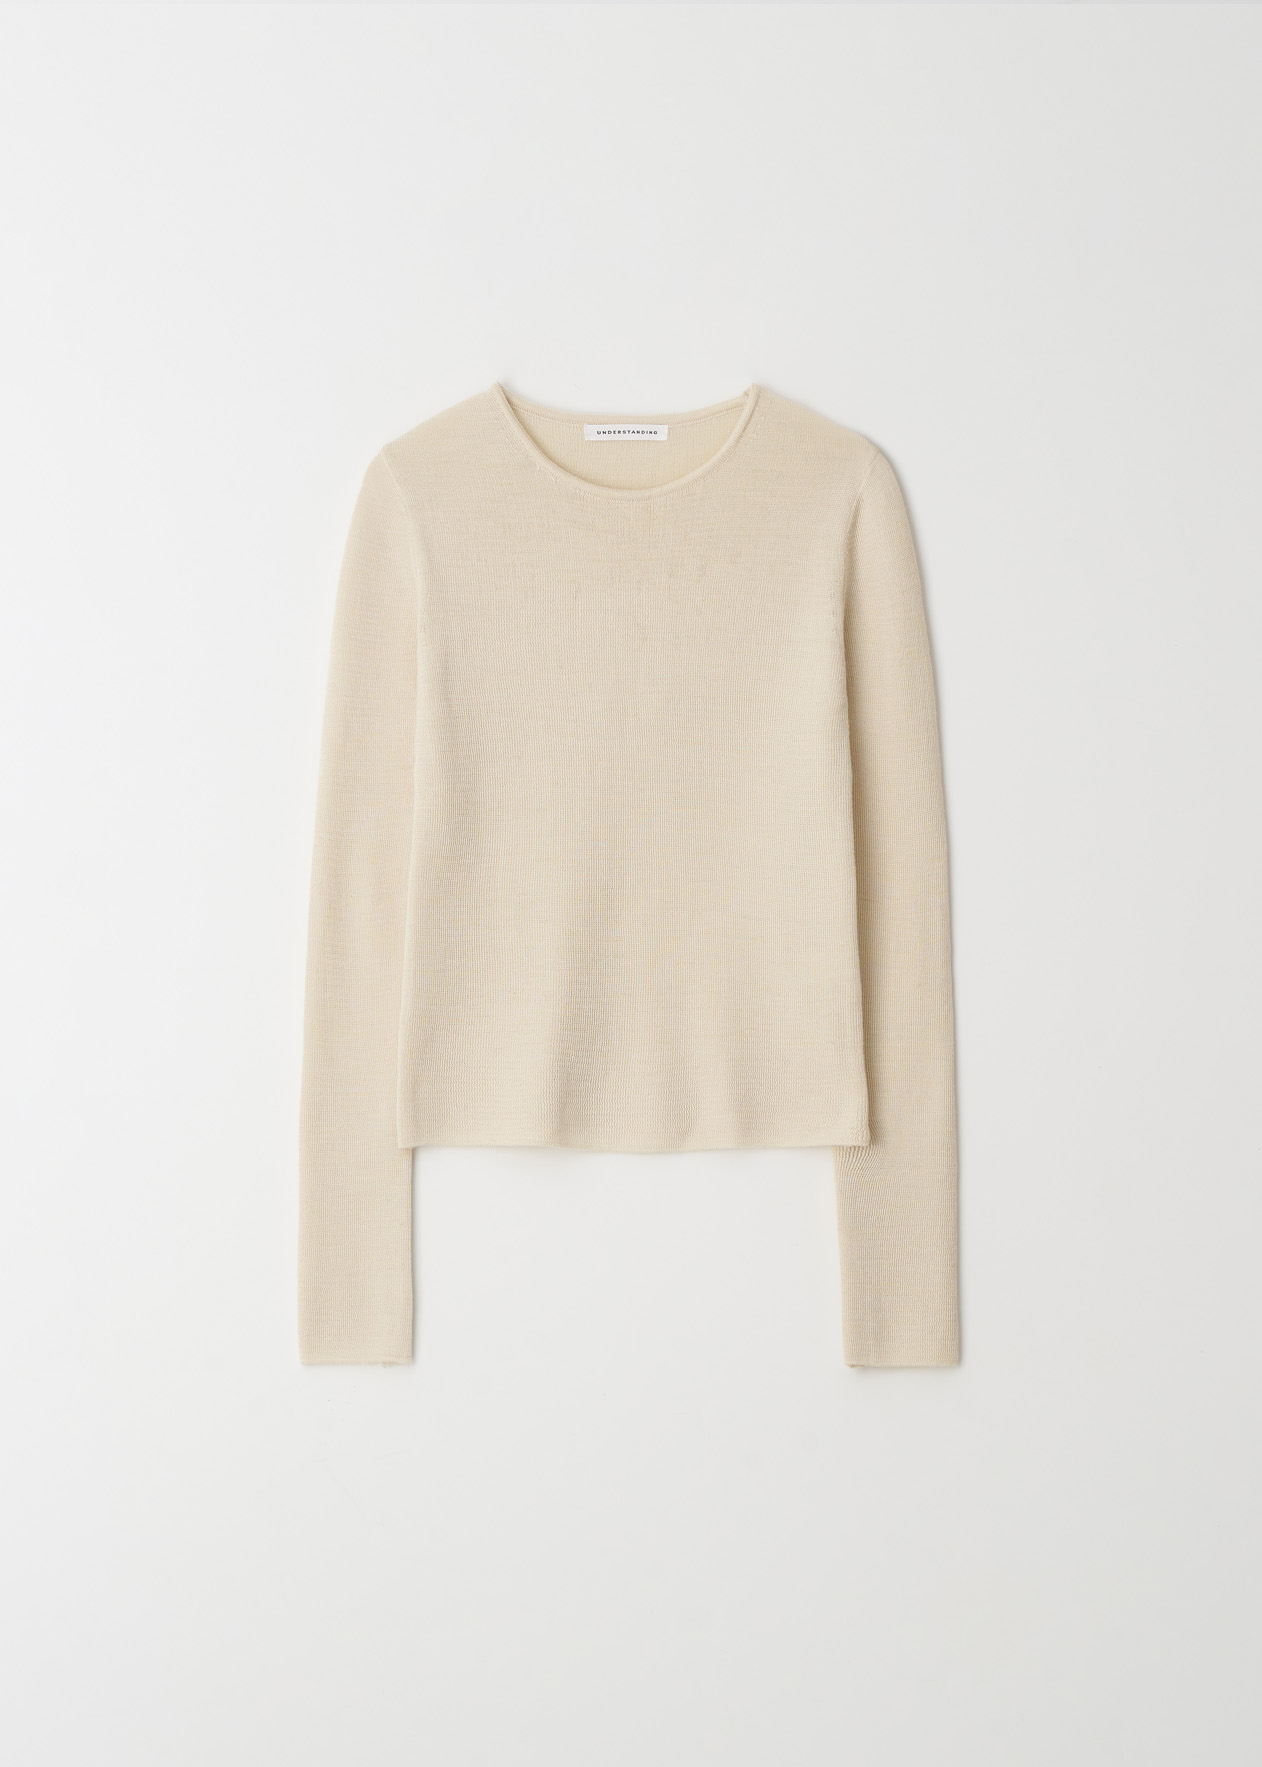 Sleeve button knit